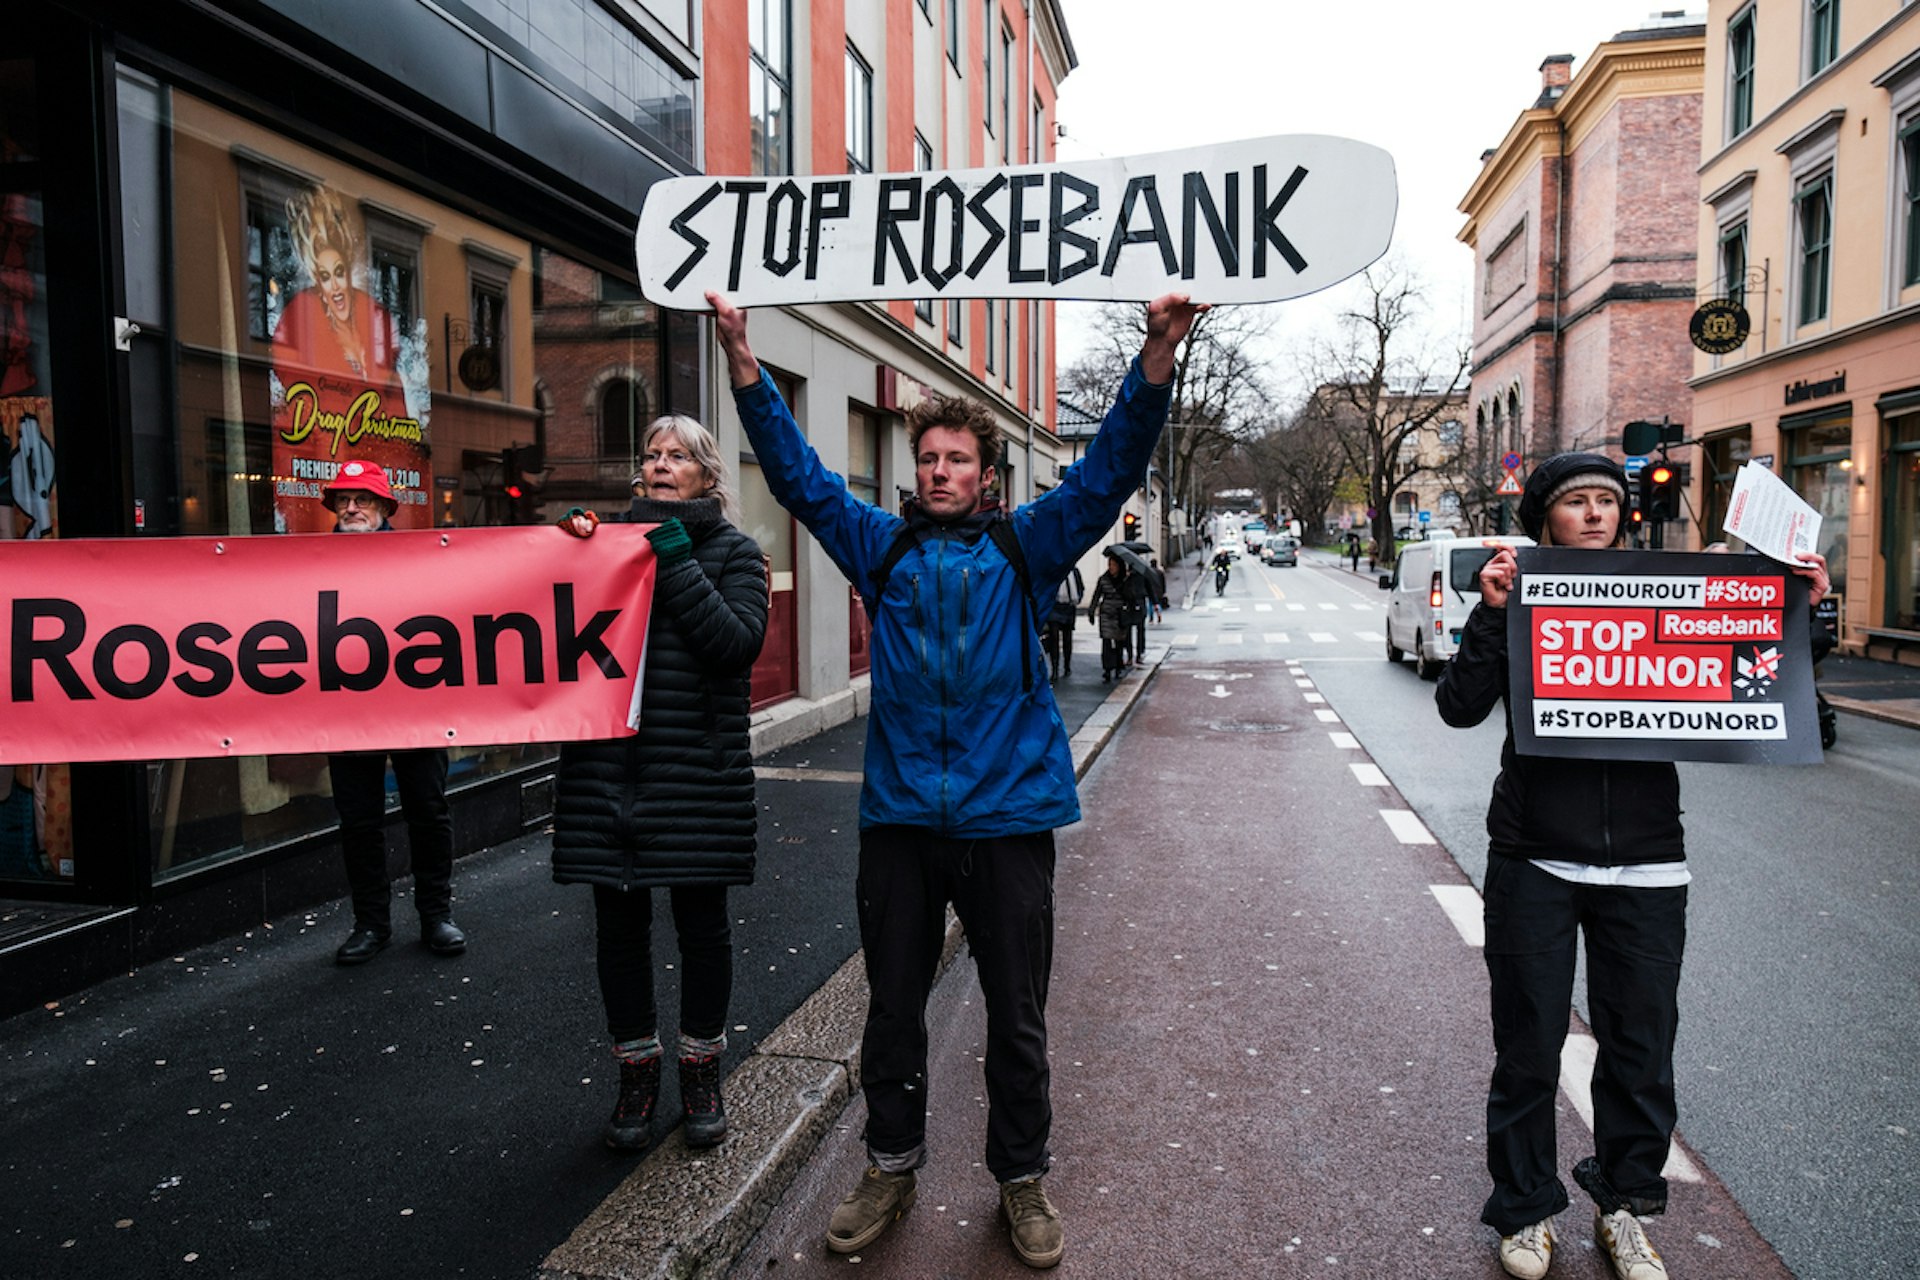 Calum, Frida, and fellow activists at a Stop Rosebank protest in Norway.